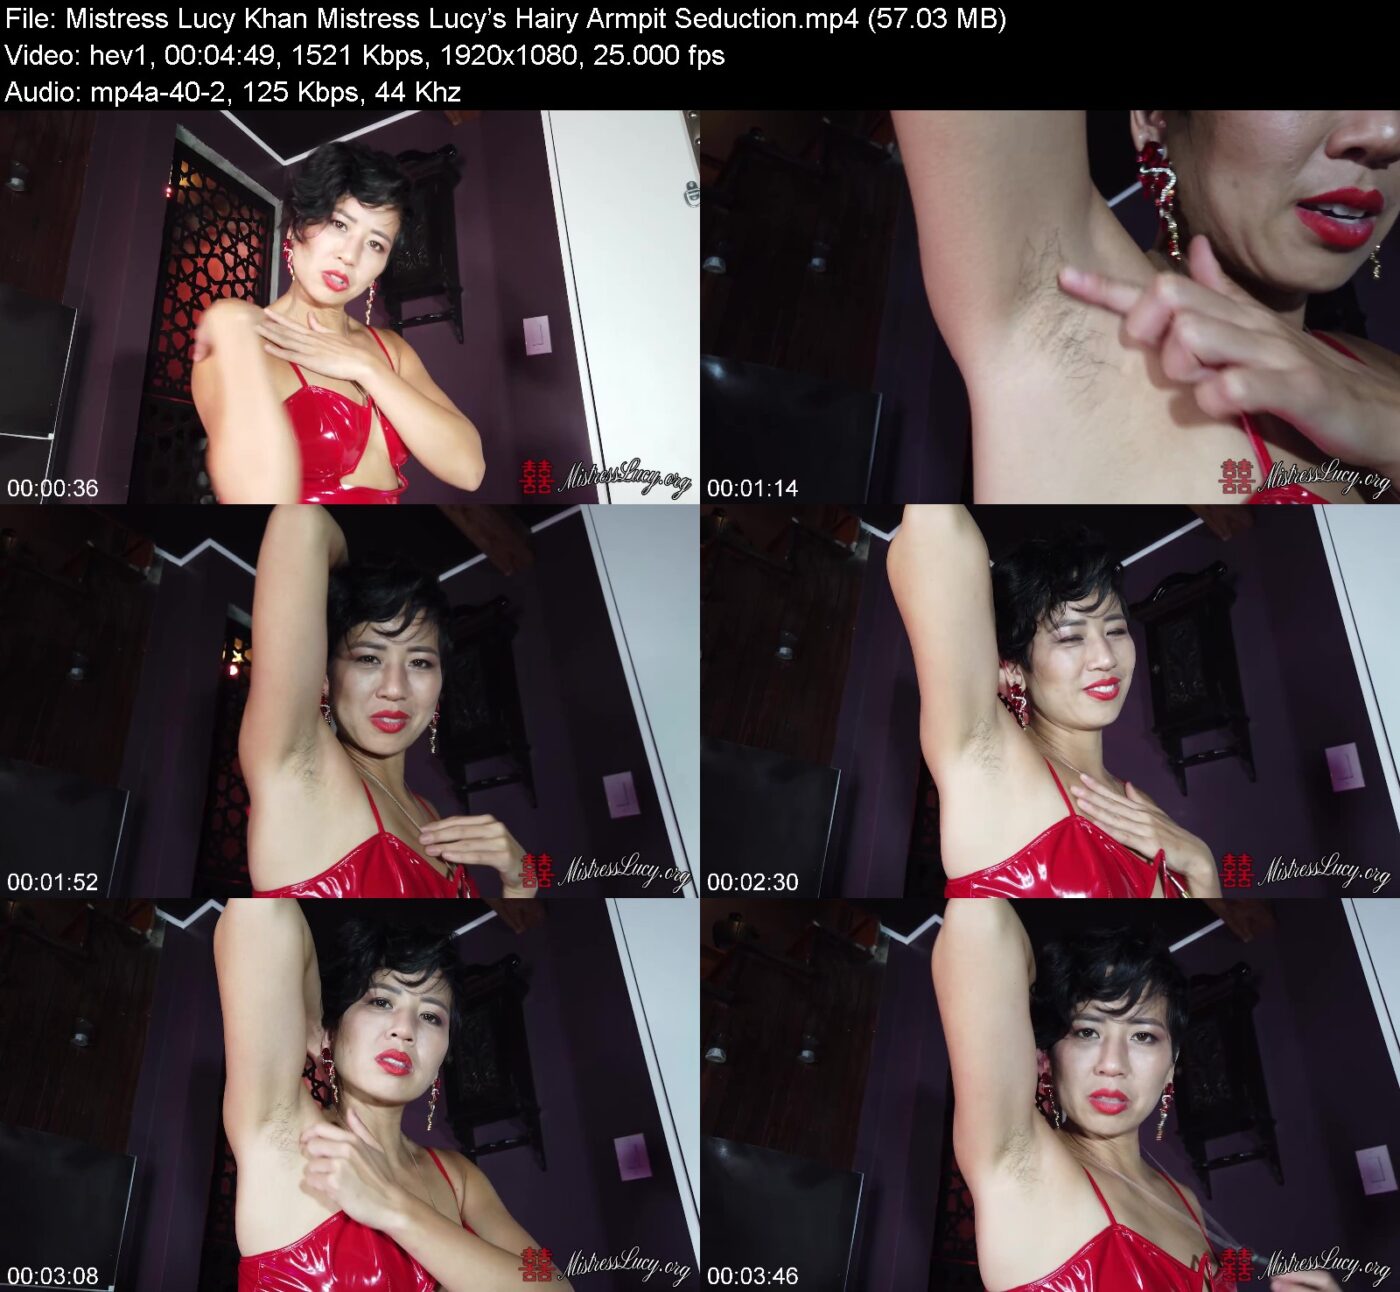 Actress: Mistress Lucy Khan. Title and Studio: Mistress Lucy’s Hairy Armpit Seduction